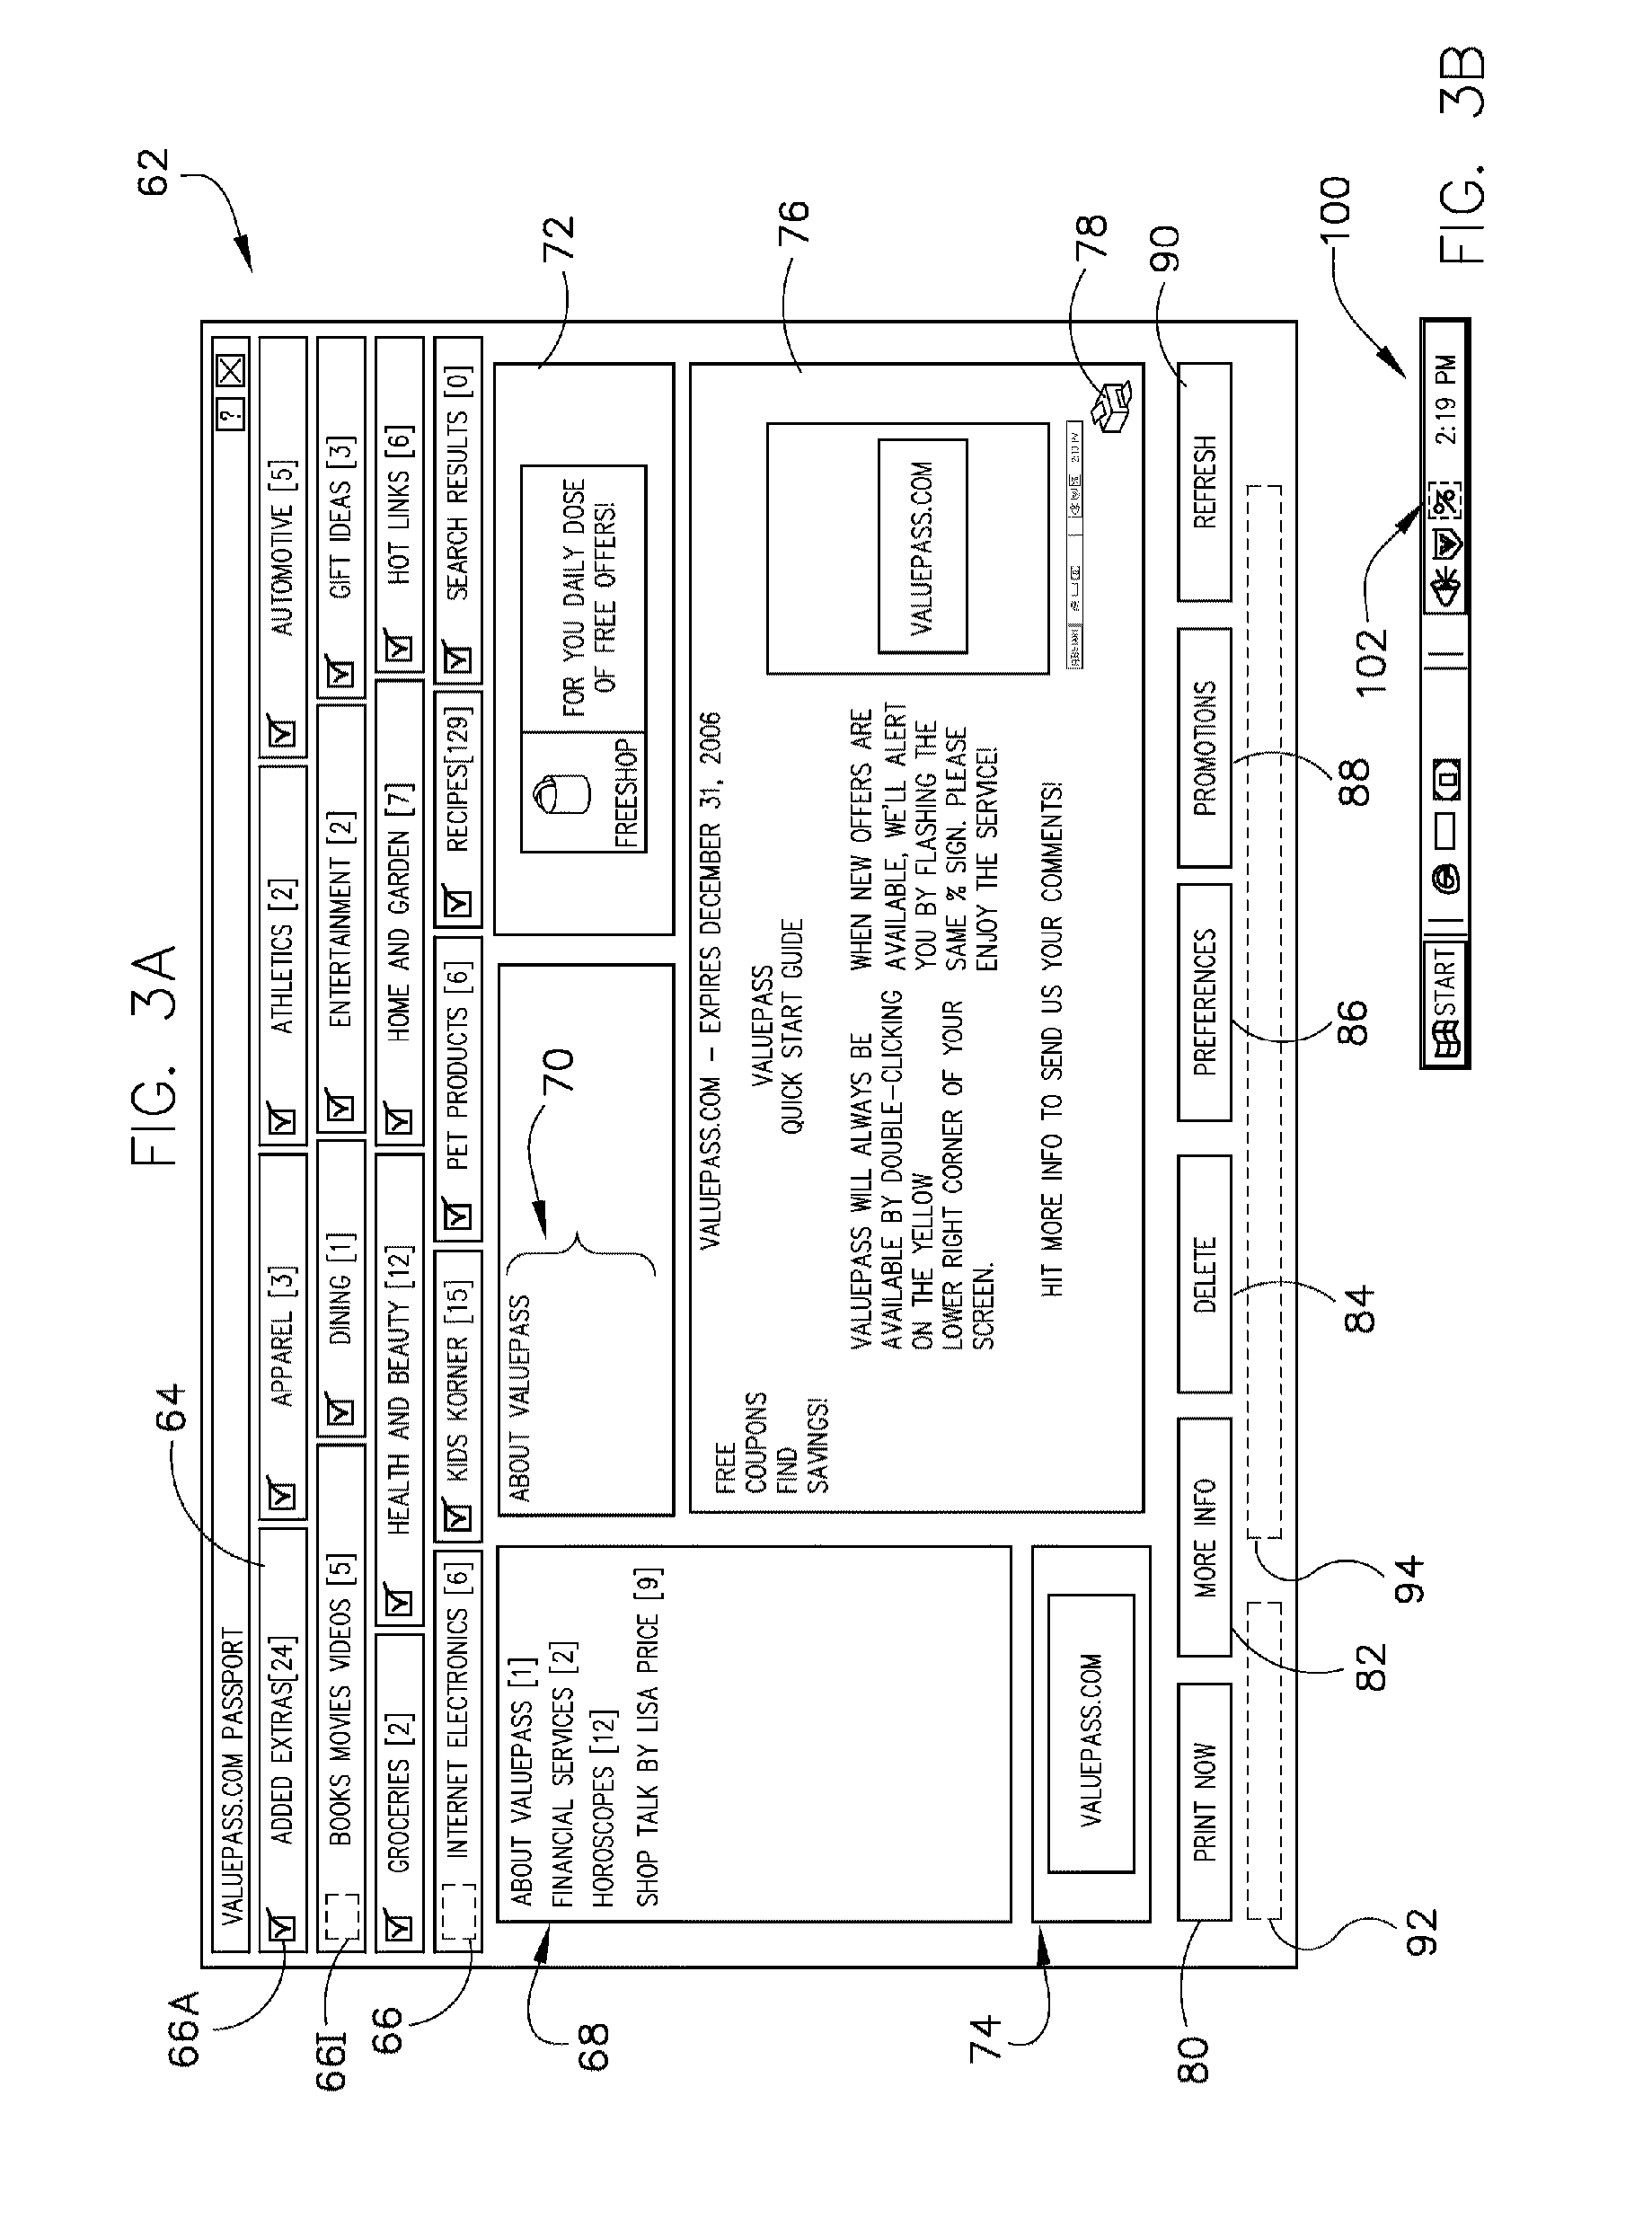 Mobile device system and method providing 3D geo-target location-based mobile commerce searching/purchases, discounts/coupons products, goods, and services, and social networking